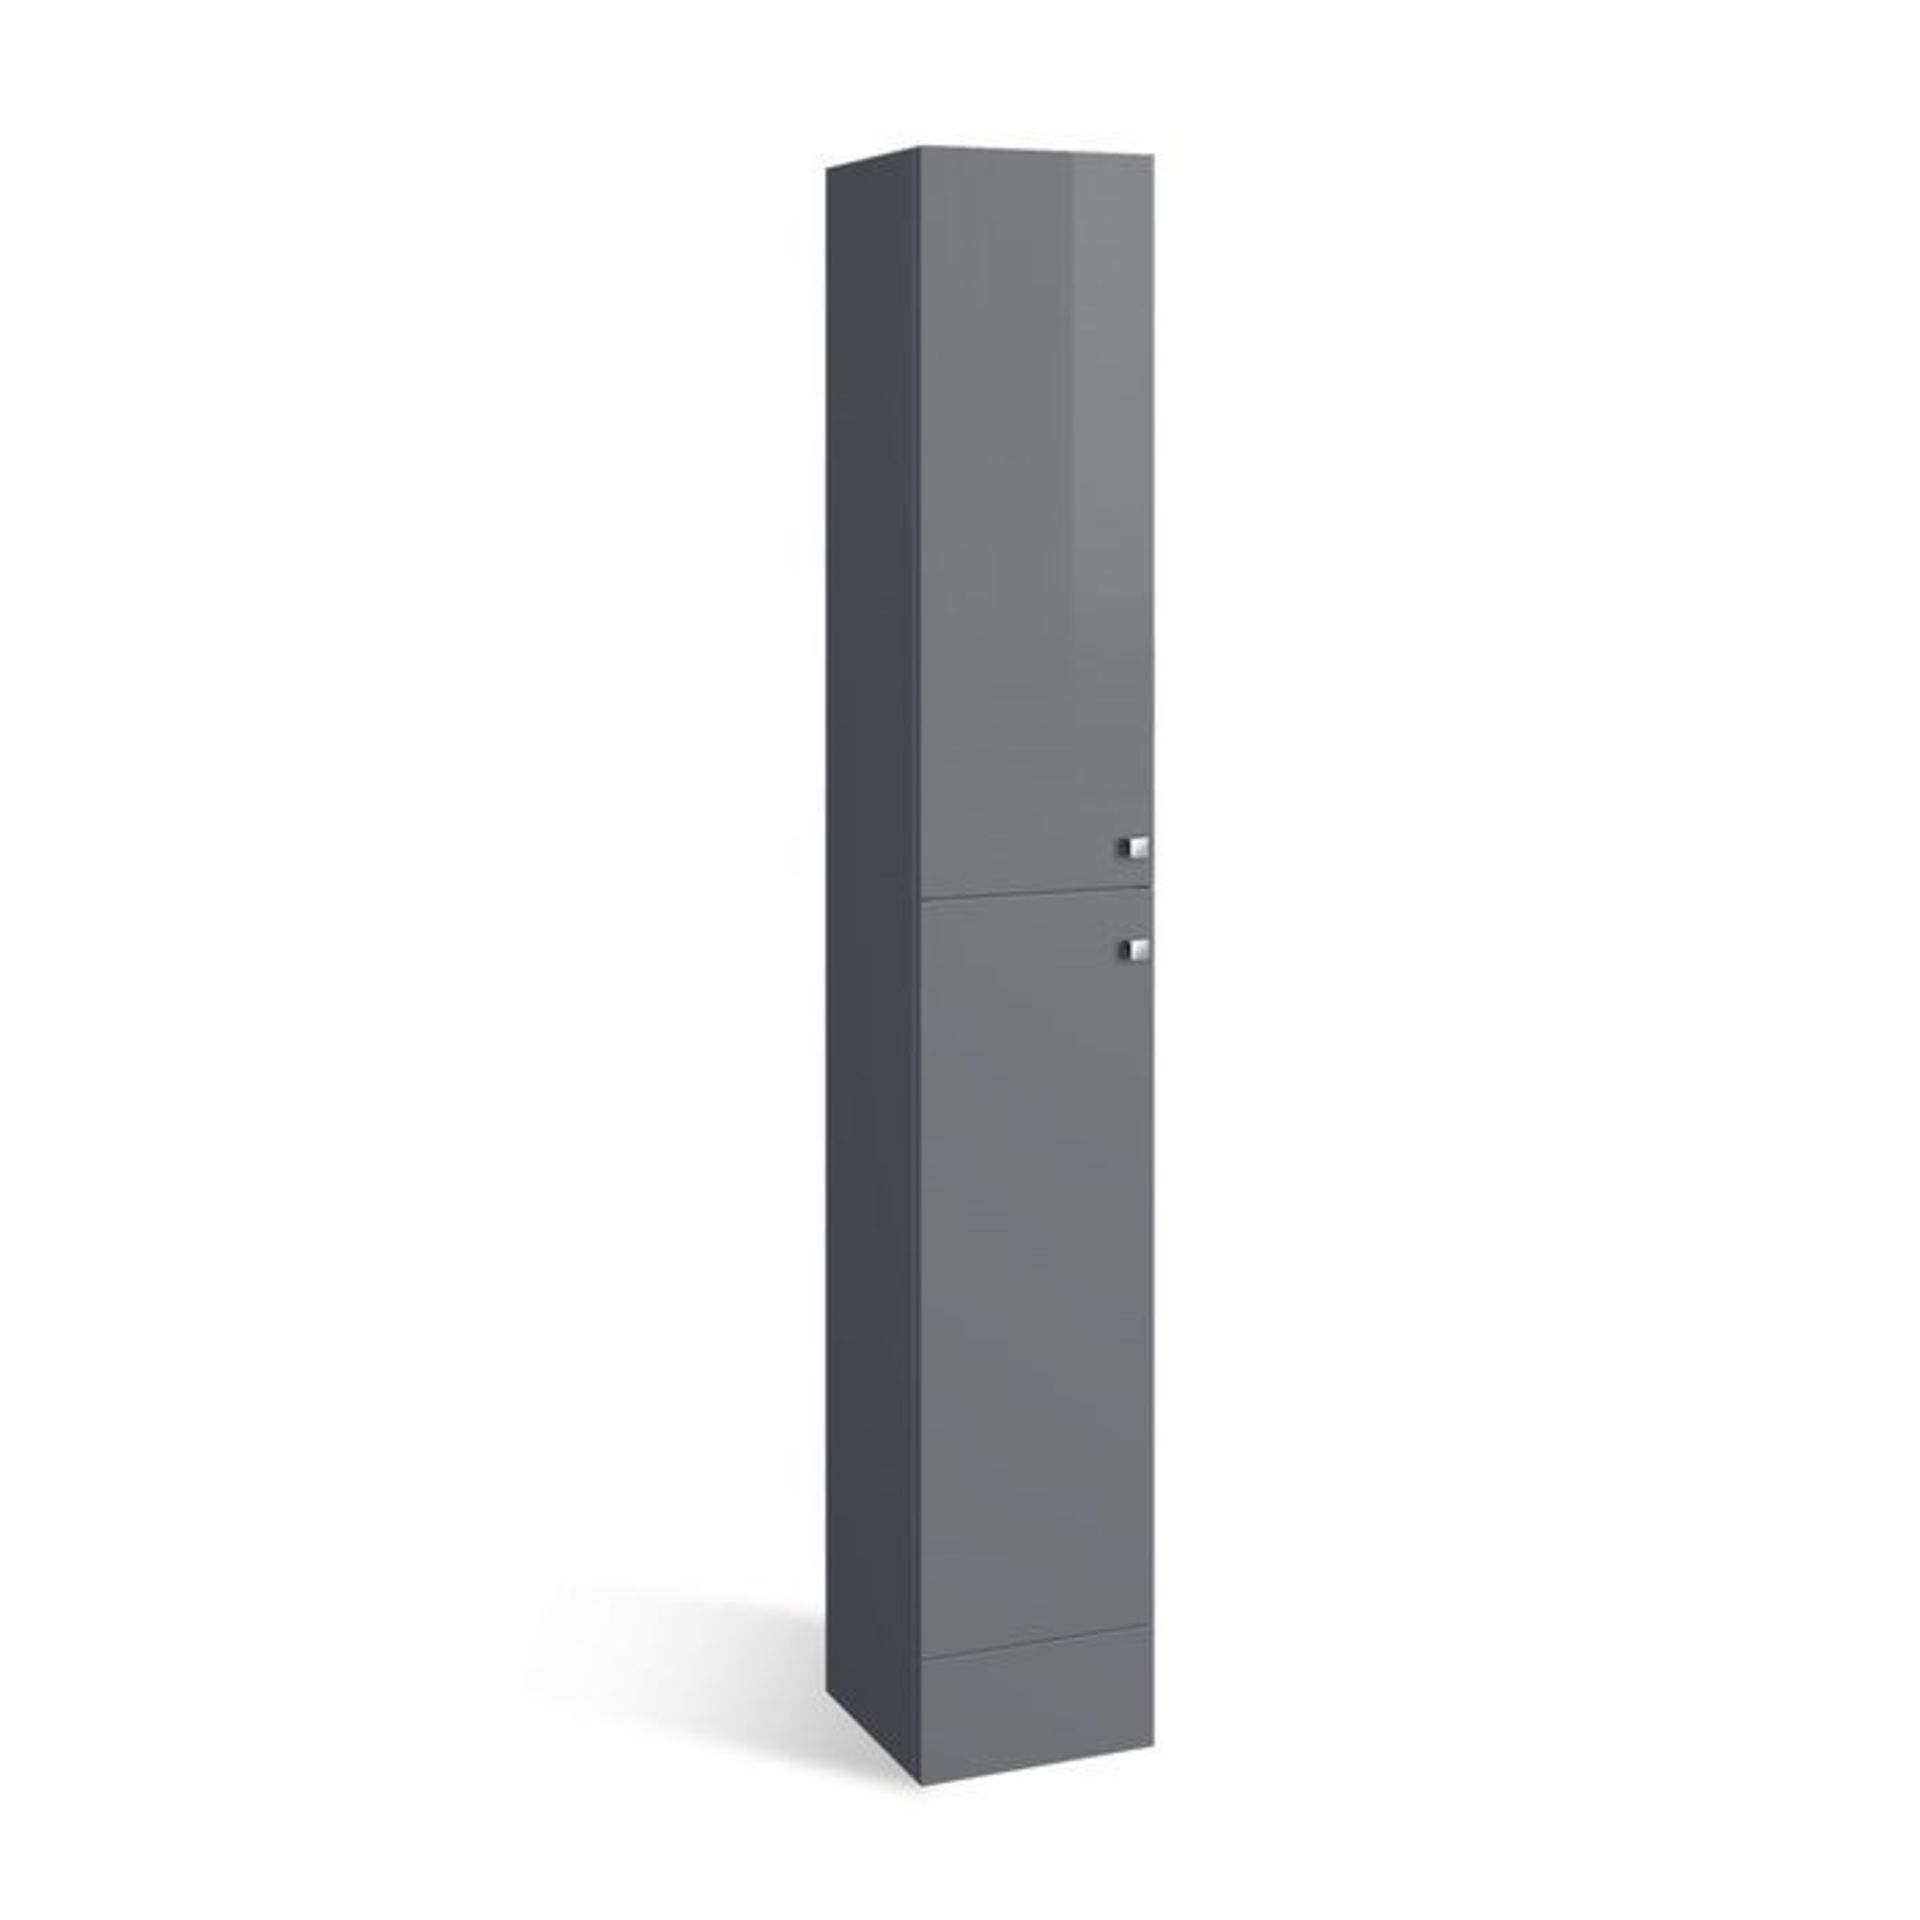 (PP22) 1900x300mm Harper Gloss Grey Tall Storage Cabinet - Floor Standing. RRP £299.99. Our tall - Image 3 of 4